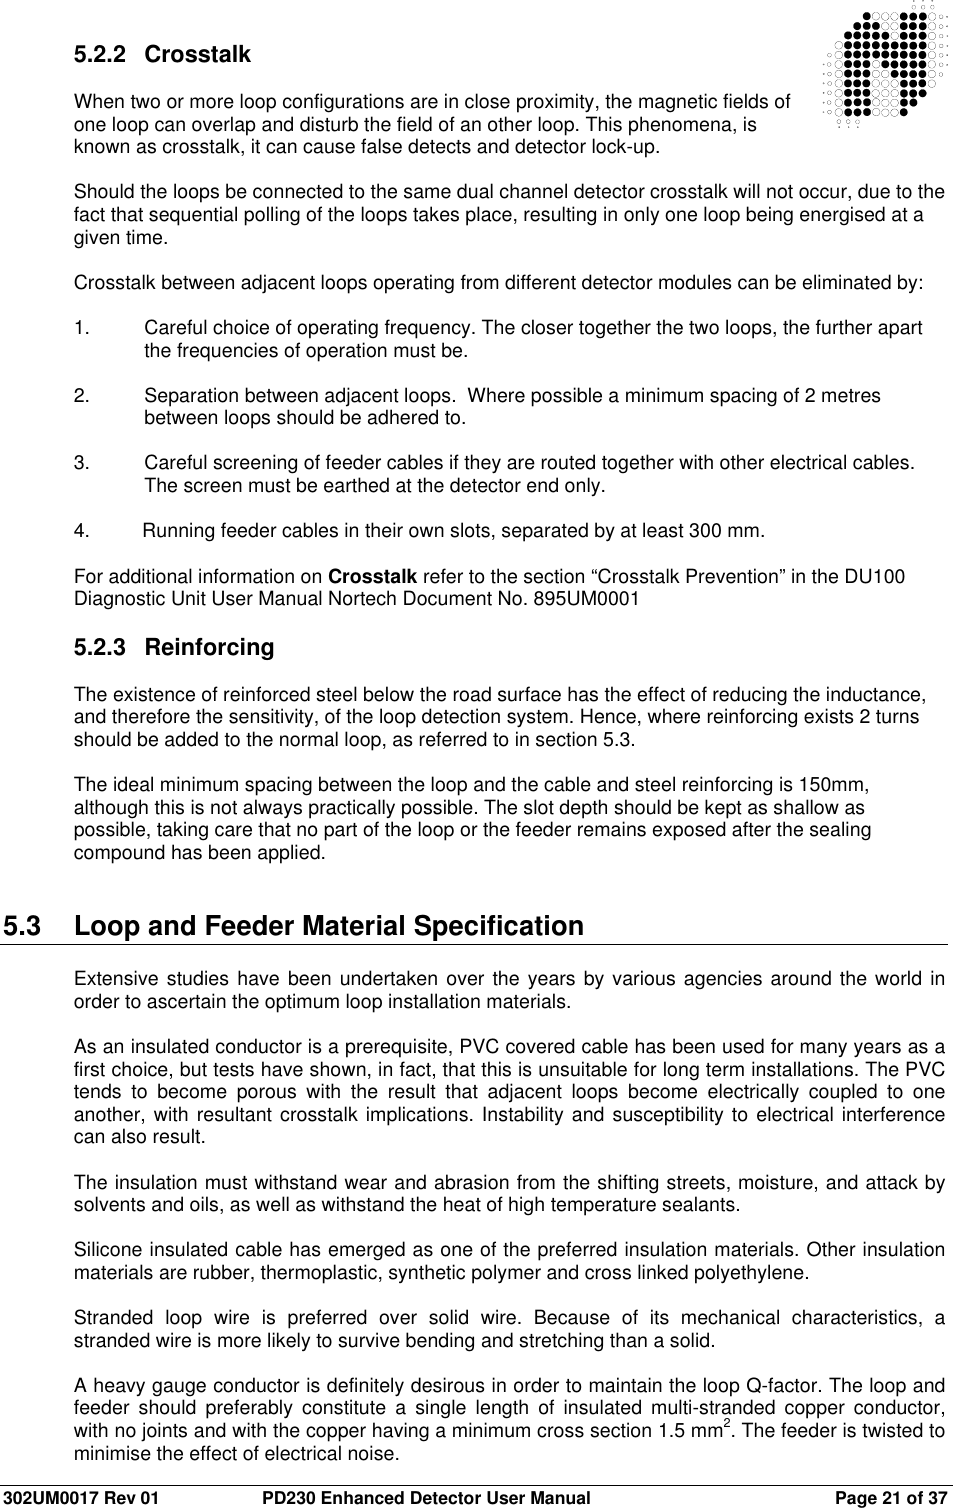  302UM0017 Rev 01  PD230 Enhanced Detector User Manual   Page 21 of 37 5.2.2  Crosstalk  When two or more loop configurations are in close proximity, the magnetic fields of one loop can overlap and disturb the field of an other loop. This phenomena, is known as crosstalk, it can cause false detects and detector lock-up.  Should the loops be connected to the same dual channel detector crosstalk will not occur, due to the fact that sequential polling of the loops takes place, resulting in only one loop being energised at a given time.  Crosstalk between adjacent loops operating from different detector modules can be eliminated by:  1.  Careful choice of operating frequency. The closer together the two loops, the further apart the frequencies of operation must be.  2.  Separation between adjacent loops.  Where possible a minimum spacing of 2 metres between loops should be adhered to.  3.  Careful screening of feeder cables if they are routed together with other electrical cables. The screen must be earthed at the detector end only.  4.  Running feeder cables in their own slots, separated by at least 300 mm.  For additional information on Crosstalk refer to the section “Crosstalk Prevention” in the DU100 Diagnostic Unit User Manual Nortech Document No. 895UM0001  5.2.3  Reinforcing  The existence of reinforced steel below the road surface has the effect of reducing the inductance, and therefore the sensitivity, of the loop detection system. Hence, where reinforcing exists 2 turns should be added to the normal loop, as referred to in section 5.3.    The ideal minimum spacing between the loop and the cable and steel reinforcing is 150mm, although this is not always practically possible. The slot depth should be kept as shallow as possible, taking care that no part of the loop or the feeder remains exposed after the sealing compound has been applied.   5.3  Loop and Feeder Material Specification  Extensive studies have  been undertaken over the years by various agencies around the world in order to ascertain the optimum loop installation materials.  As an insulated conductor is a prerequisite, PVC covered cable has been used for many years as a first choice, but tests have shown, in fact, that this is unsuitable for long term installations. The PVC tends  to  become  porous  with  the  result  that  adjacent  loops  become  electrically  coupled  to  one another, with resultant crosstalk implications. Instability and susceptibility to electrical interference can also result.  The insulation must withstand wear and abrasion from the shifting streets, moisture, and attack by solvents and oils, as well as withstand the heat of high temperature sealants.  Silicone insulated cable has emerged as one of the preferred insulation materials. Other insulation materials are rubber, thermoplastic, synthetic polymer and cross linked polyethylene.  Stranded  loop  wire  is  preferred  over  solid  wire.  Because  of  its  mechanical  characteristics,  a stranded wire is more likely to survive bending and stretching than a solid.  A heavy gauge conductor is definitely desirous in order to maintain the loop Q-factor. The loop and feeder  should  preferably  constitute  a  single  length  of  insulated  multi-stranded  copper  conductor, with no joints and with the copper having a minimum cross section 1.5 mm2. The feeder is twisted to minimise the effect of electrical noise. 